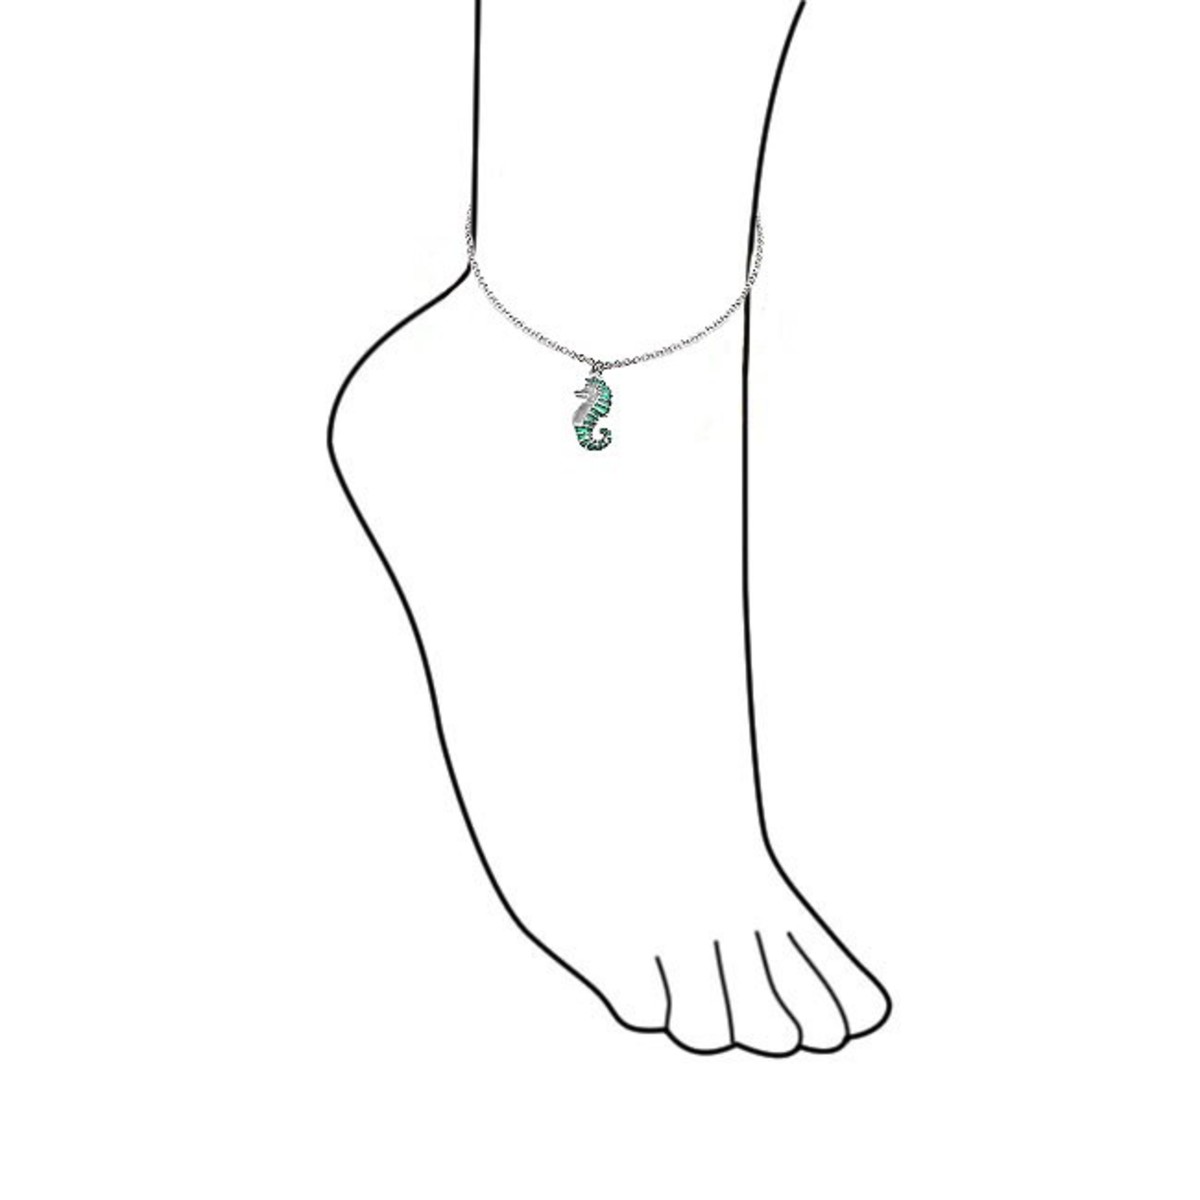 Silhouette Charm Display on Anklet to Showcase the Size of the Anklet Bracelet